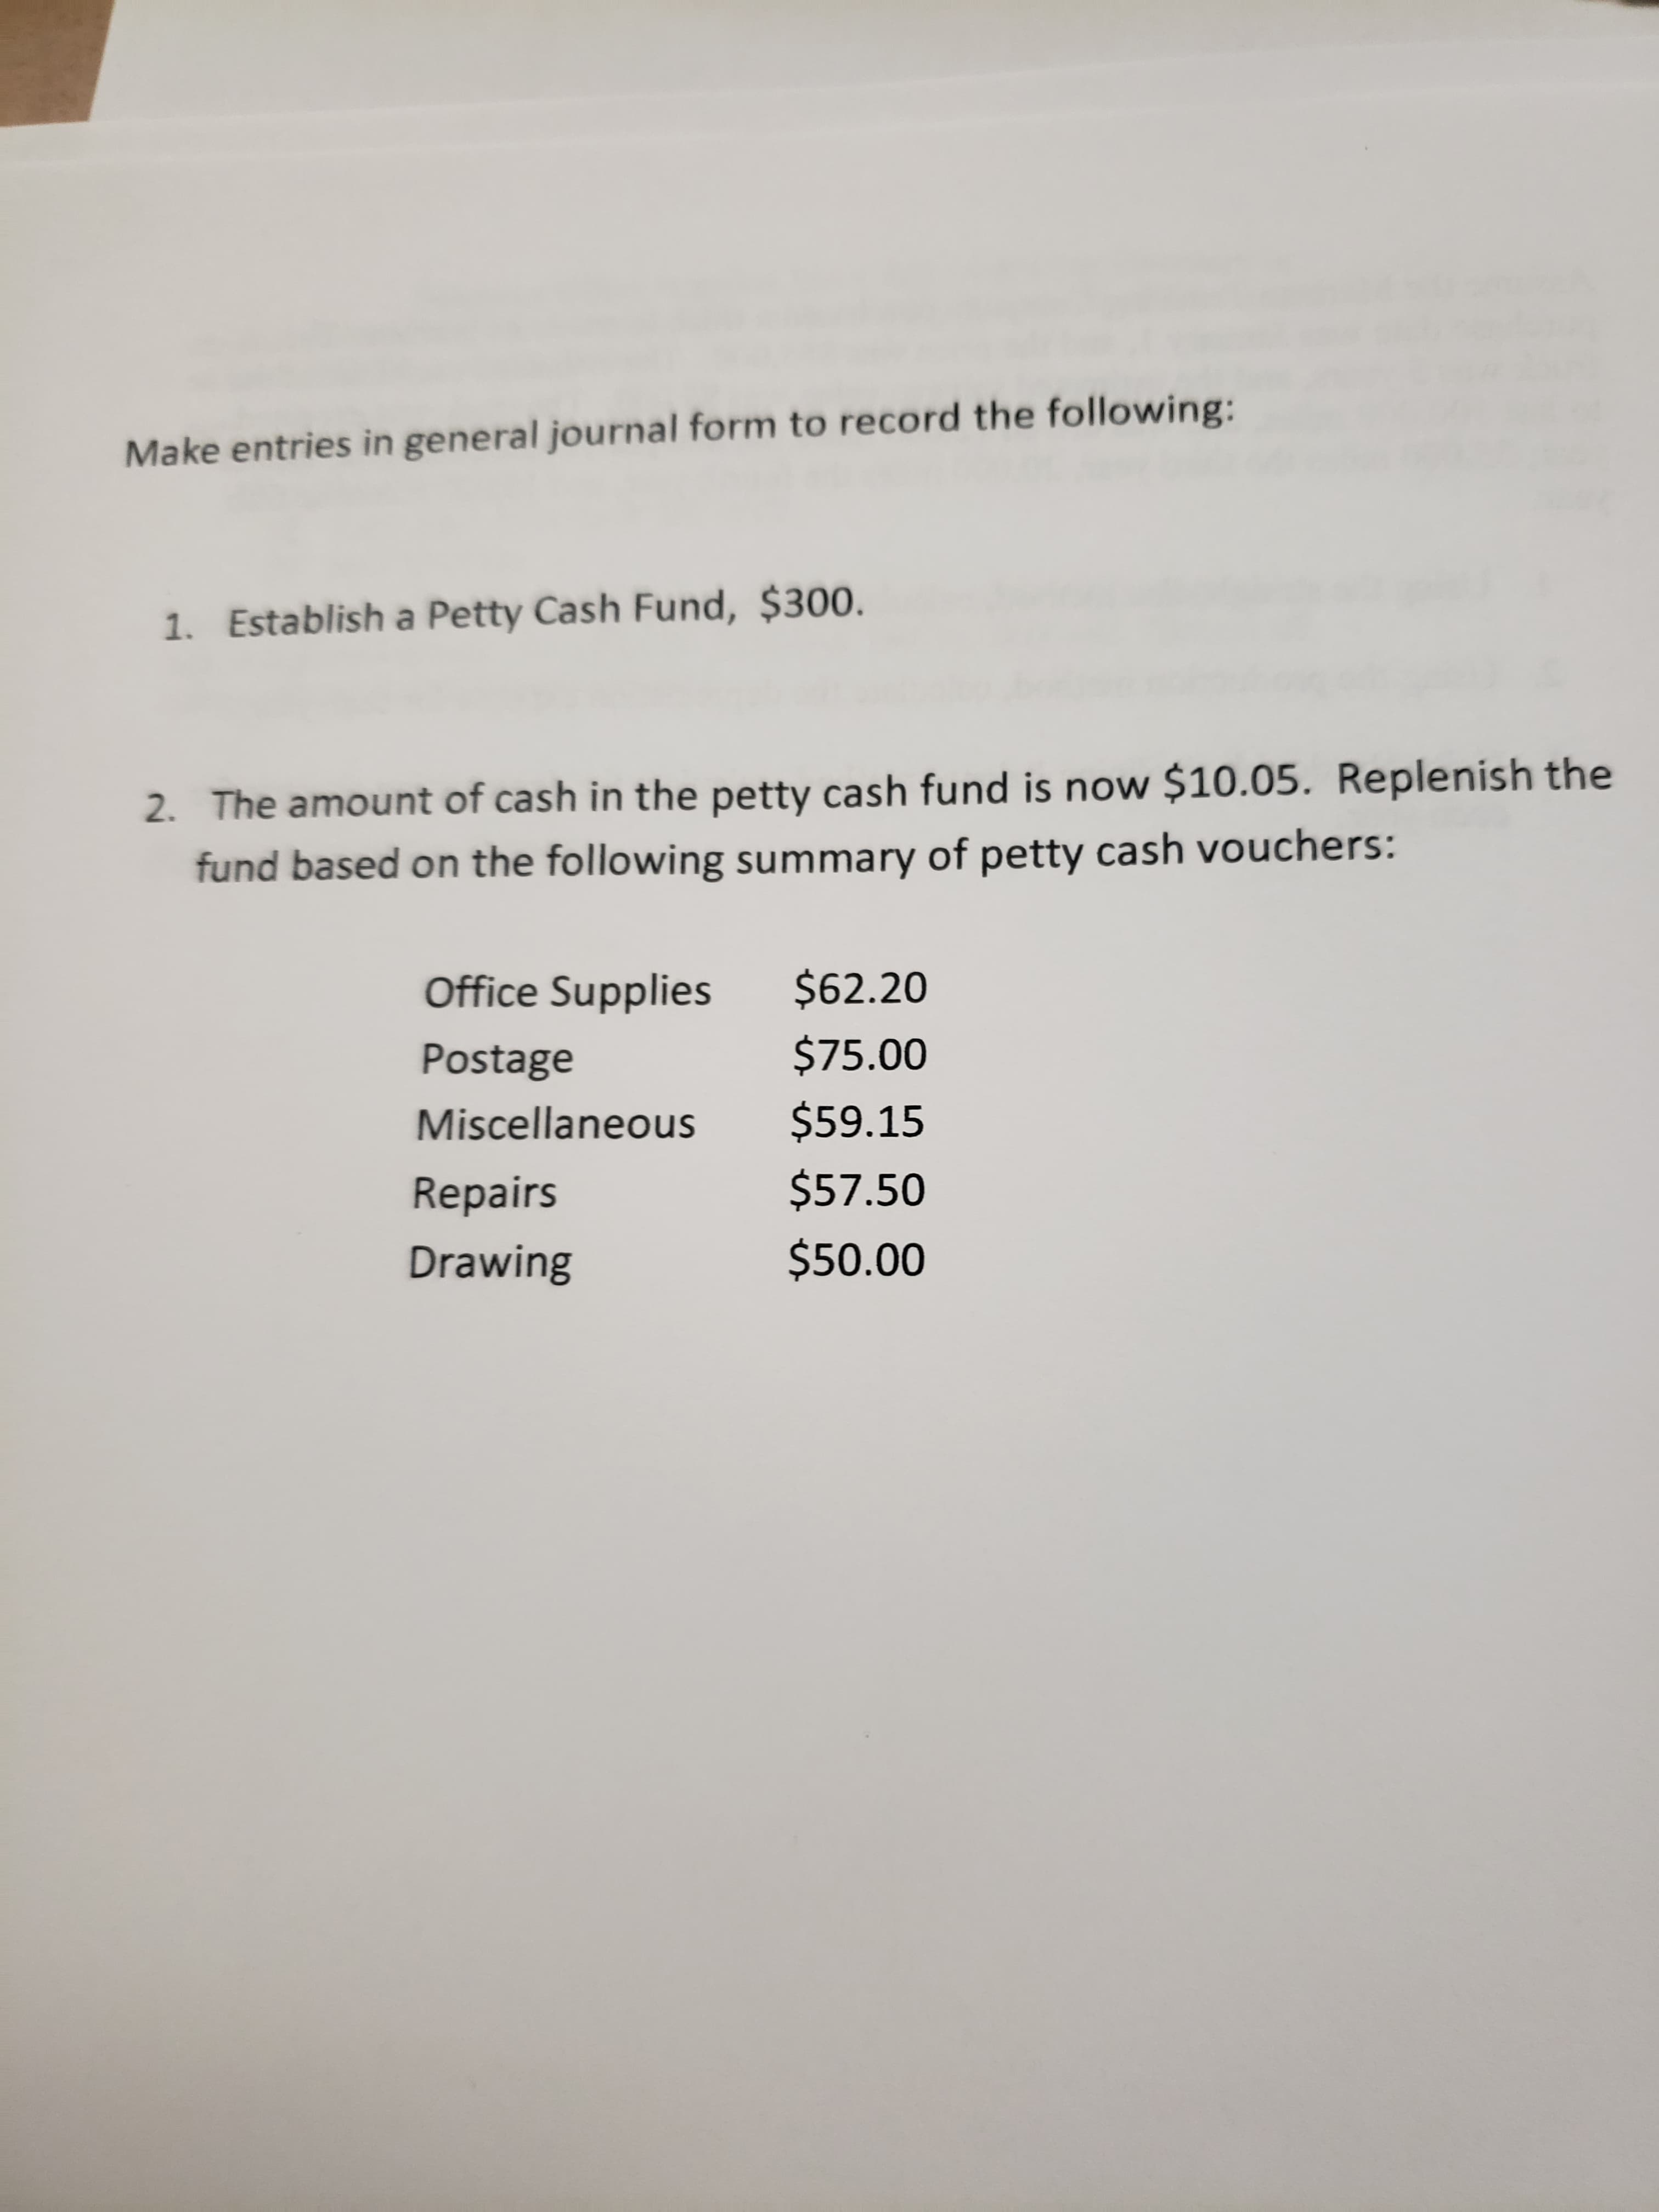 Make entries in general journal form to record the following:
1. Establish a Petty Cash Fund, $300.
2. The amount of cash in the petty cash fund is now $10.05. Replenish the
fund based on the following summary of petty cash vouchers:
$62.20
Office Supplies
$75.00
Postage
$59.15
Miscellaneous
$57.50
Repairs
$50.00
Drawing
